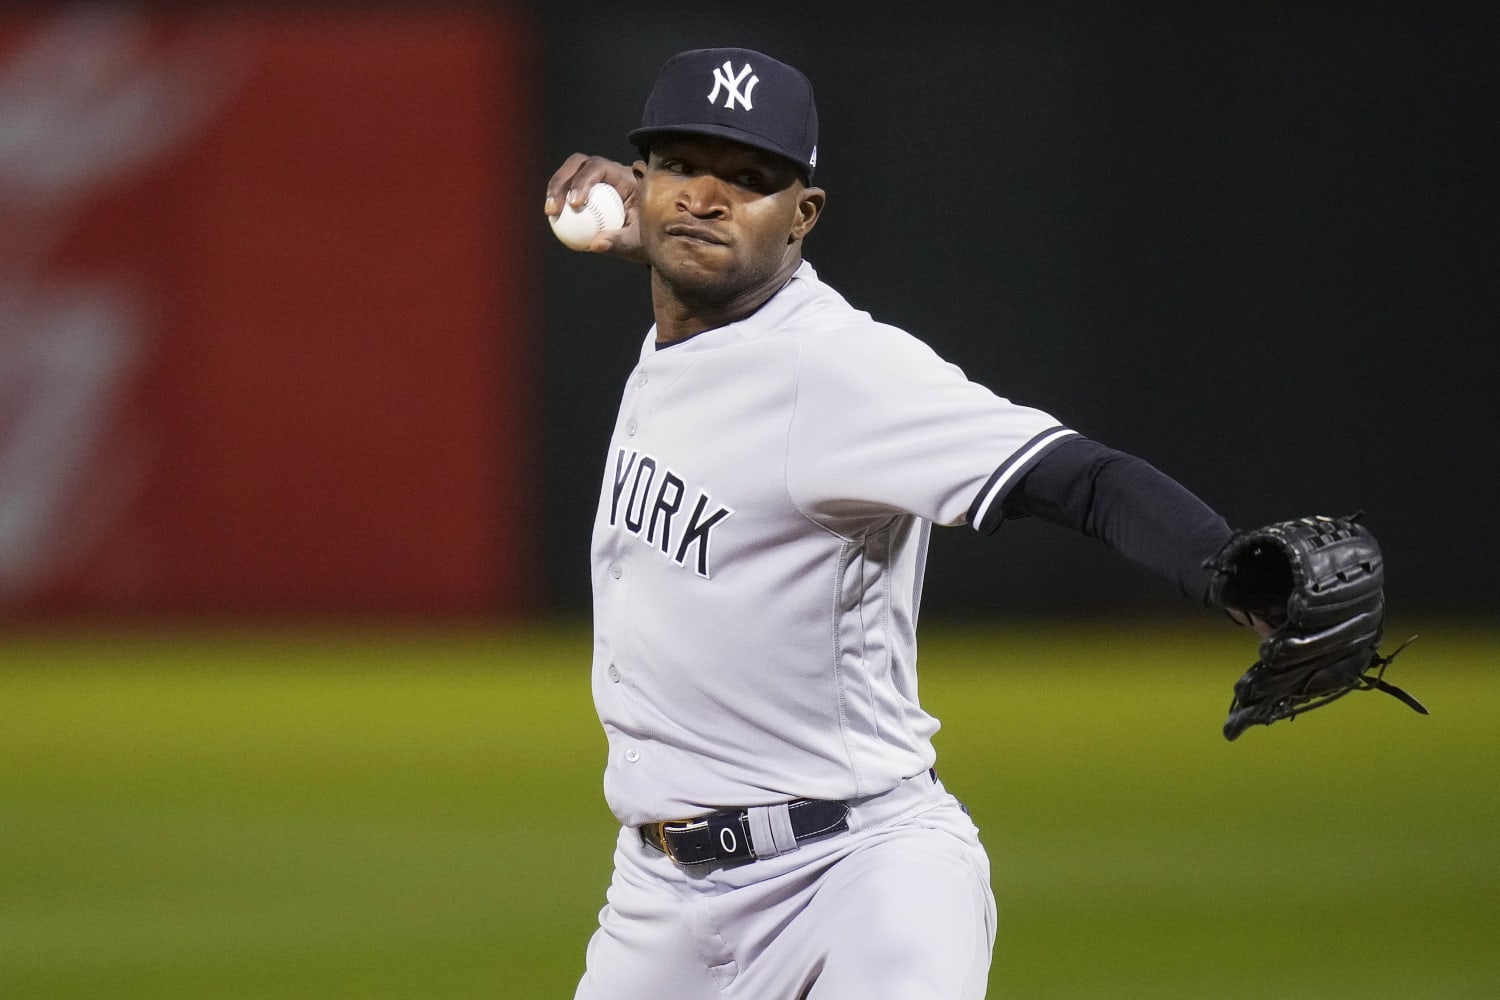 Yankees' Domingo German pitches perfect game vs. Oakland A's